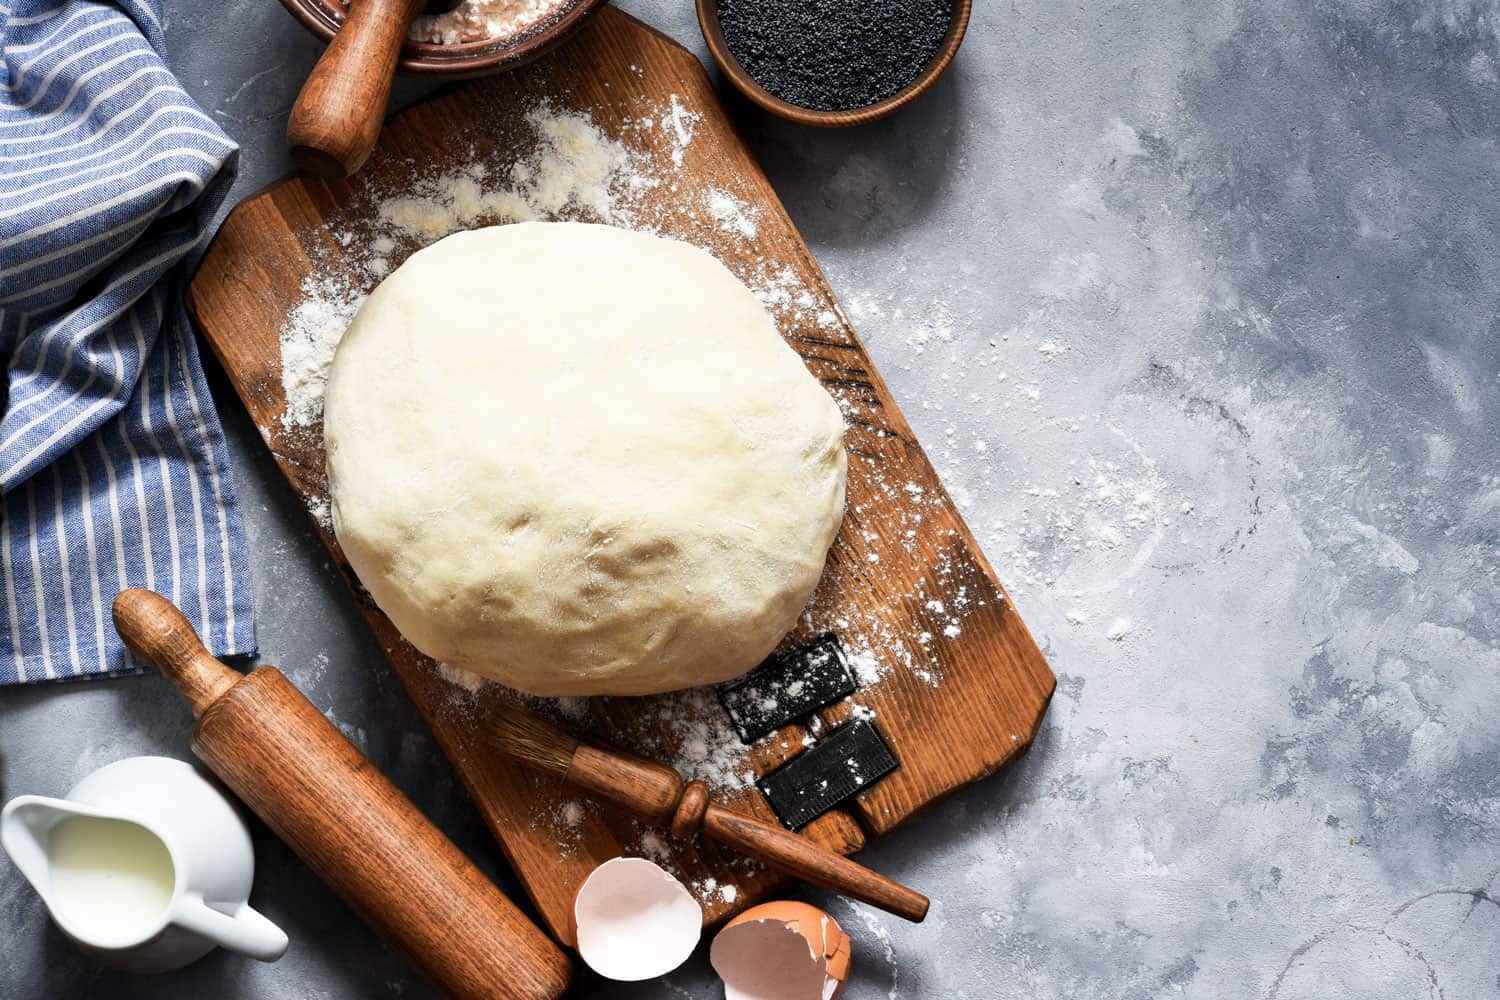 Storing your pizza dough properly tips and tricks to keep it using longer